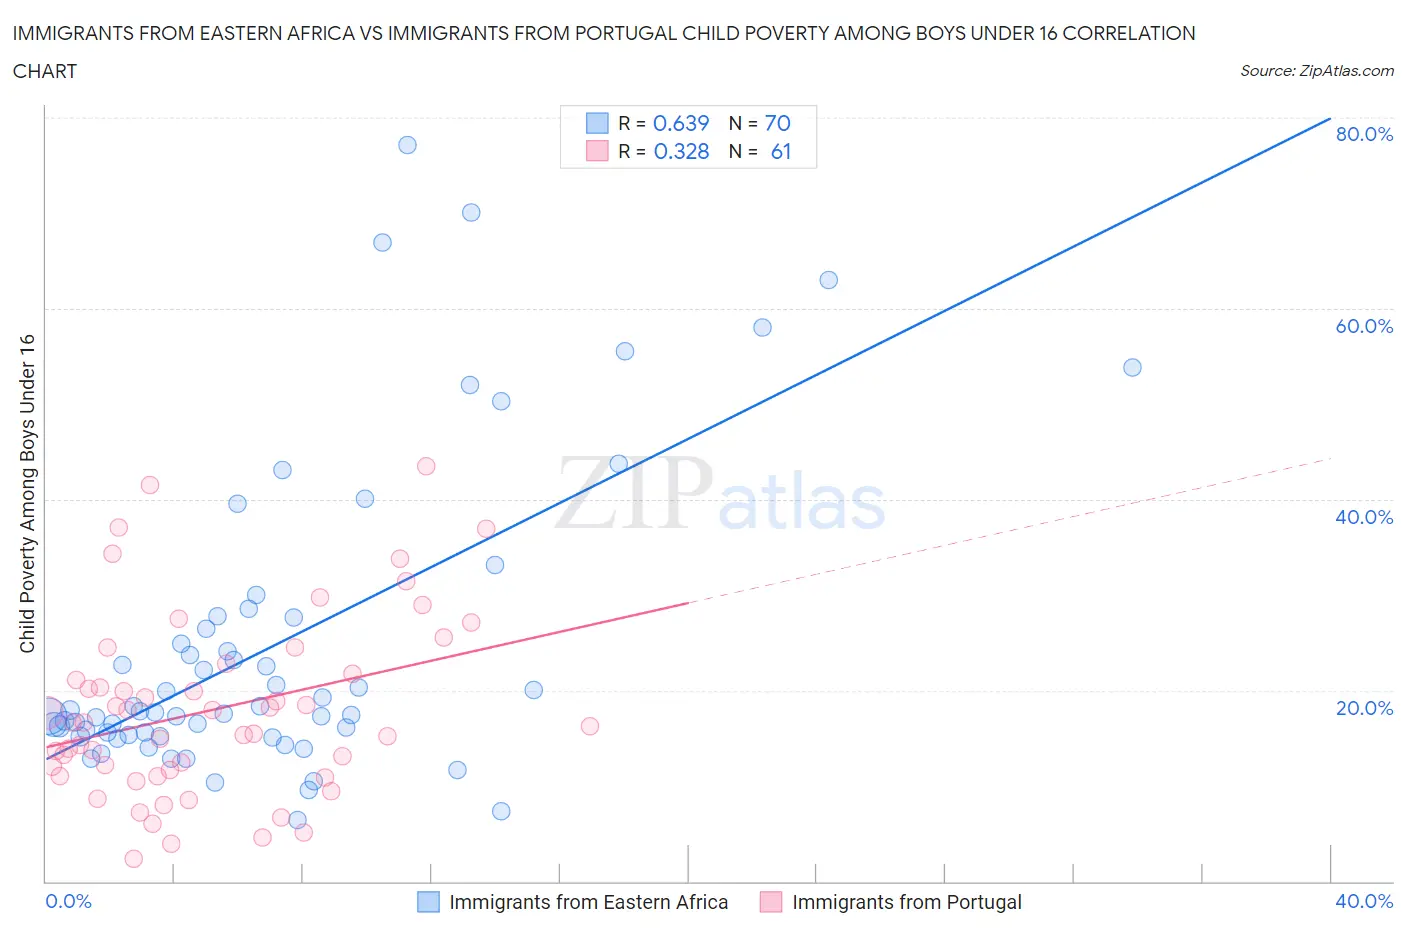 Immigrants from Eastern Africa vs Immigrants from Portugal Child Poverty Among Boys Under 16